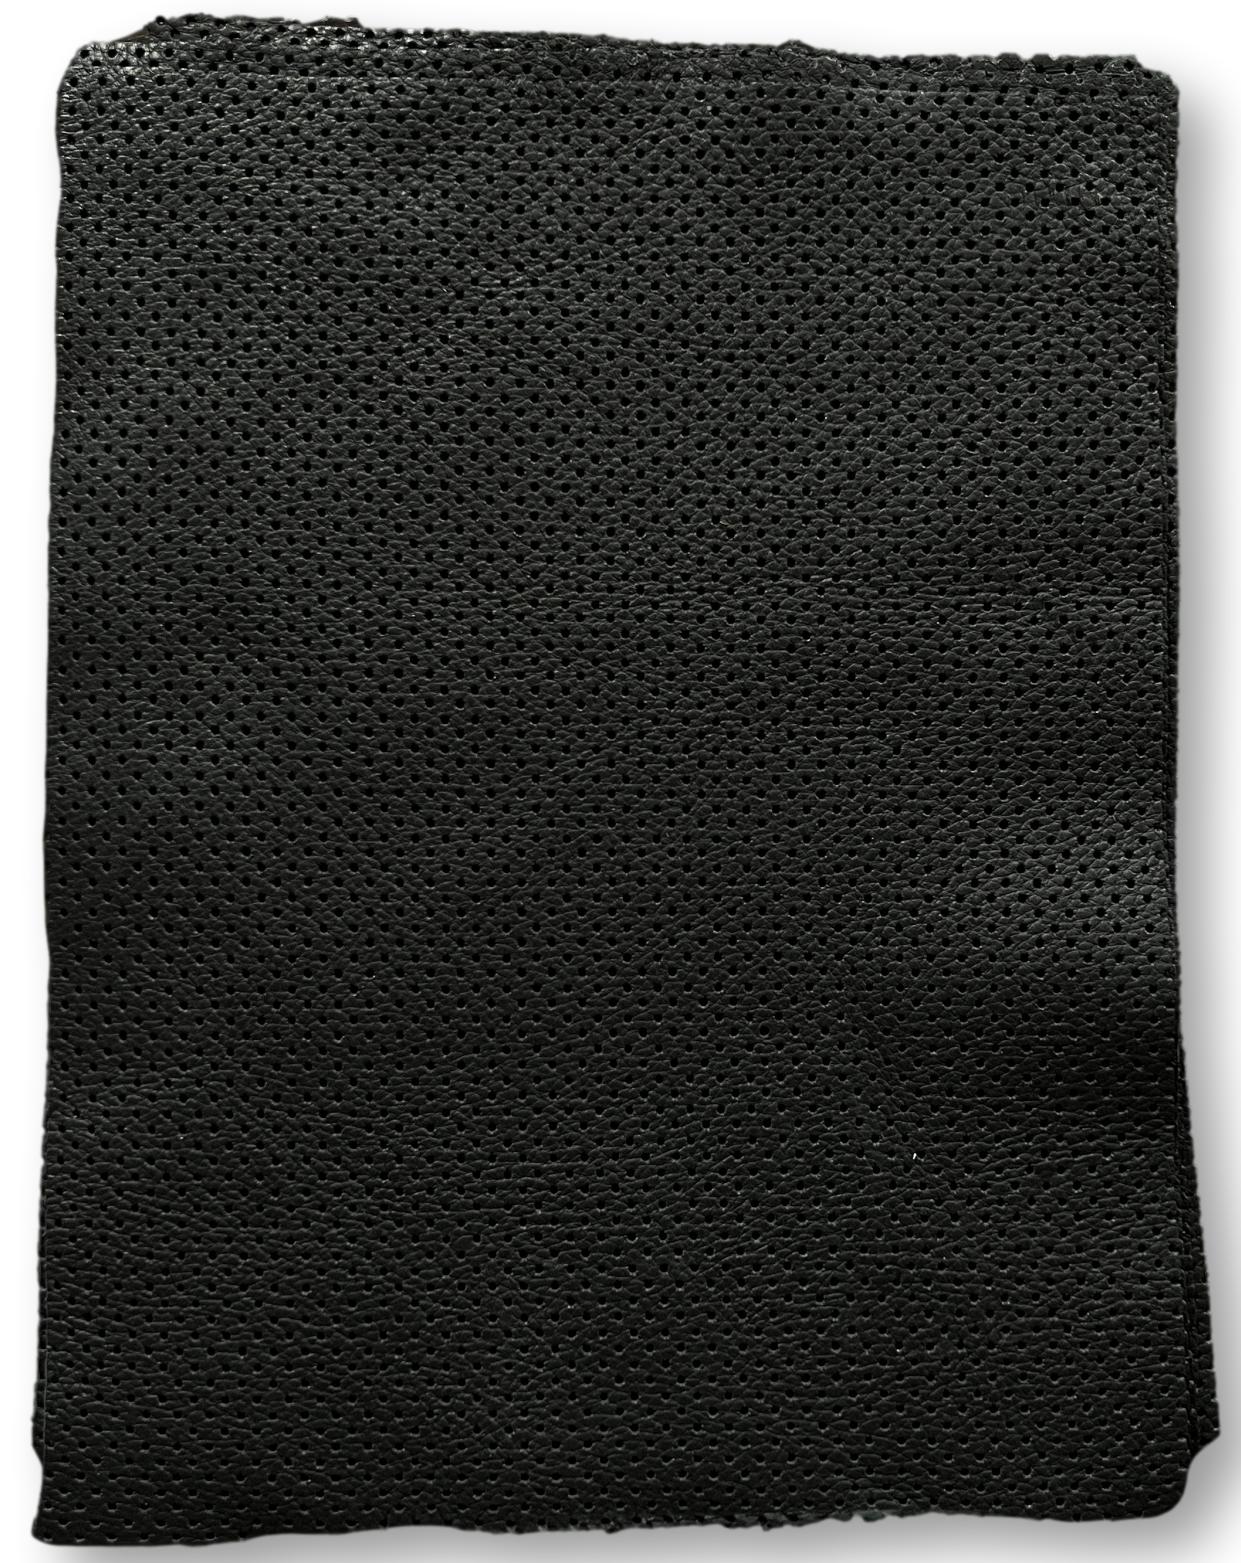 Black Perforated Cowhide Leather: 8.5'' x 11'' Pre-Cut Pieces